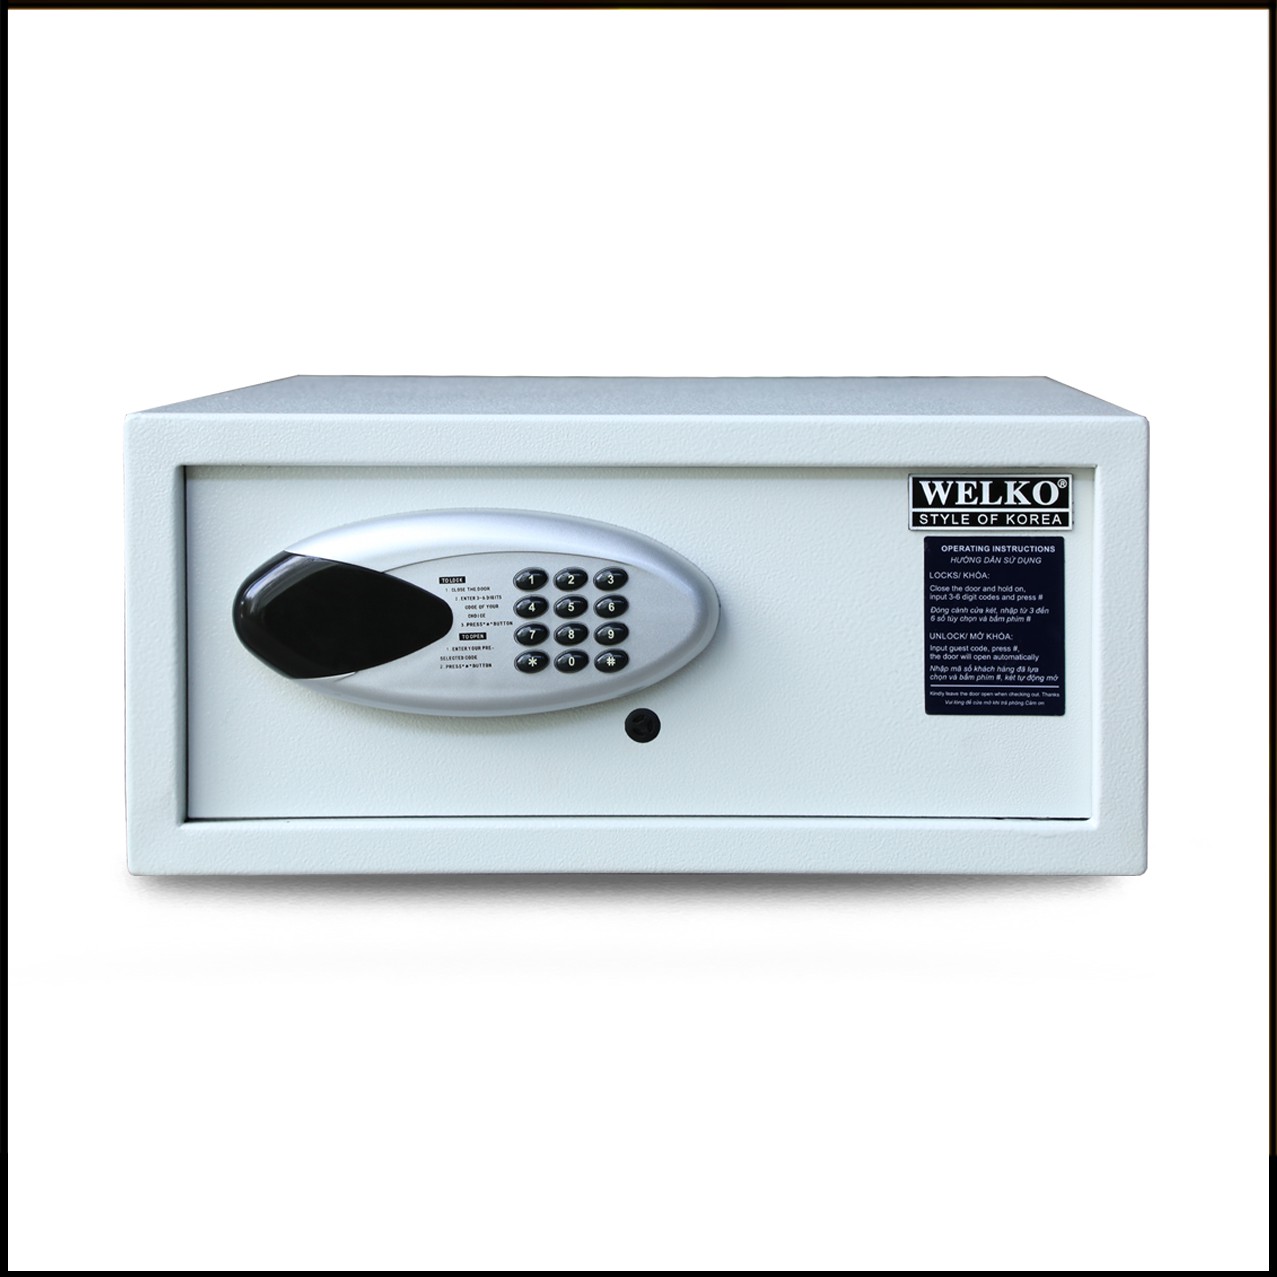 WELKO Best Hotel Safe For Home Wholesale Suppliers